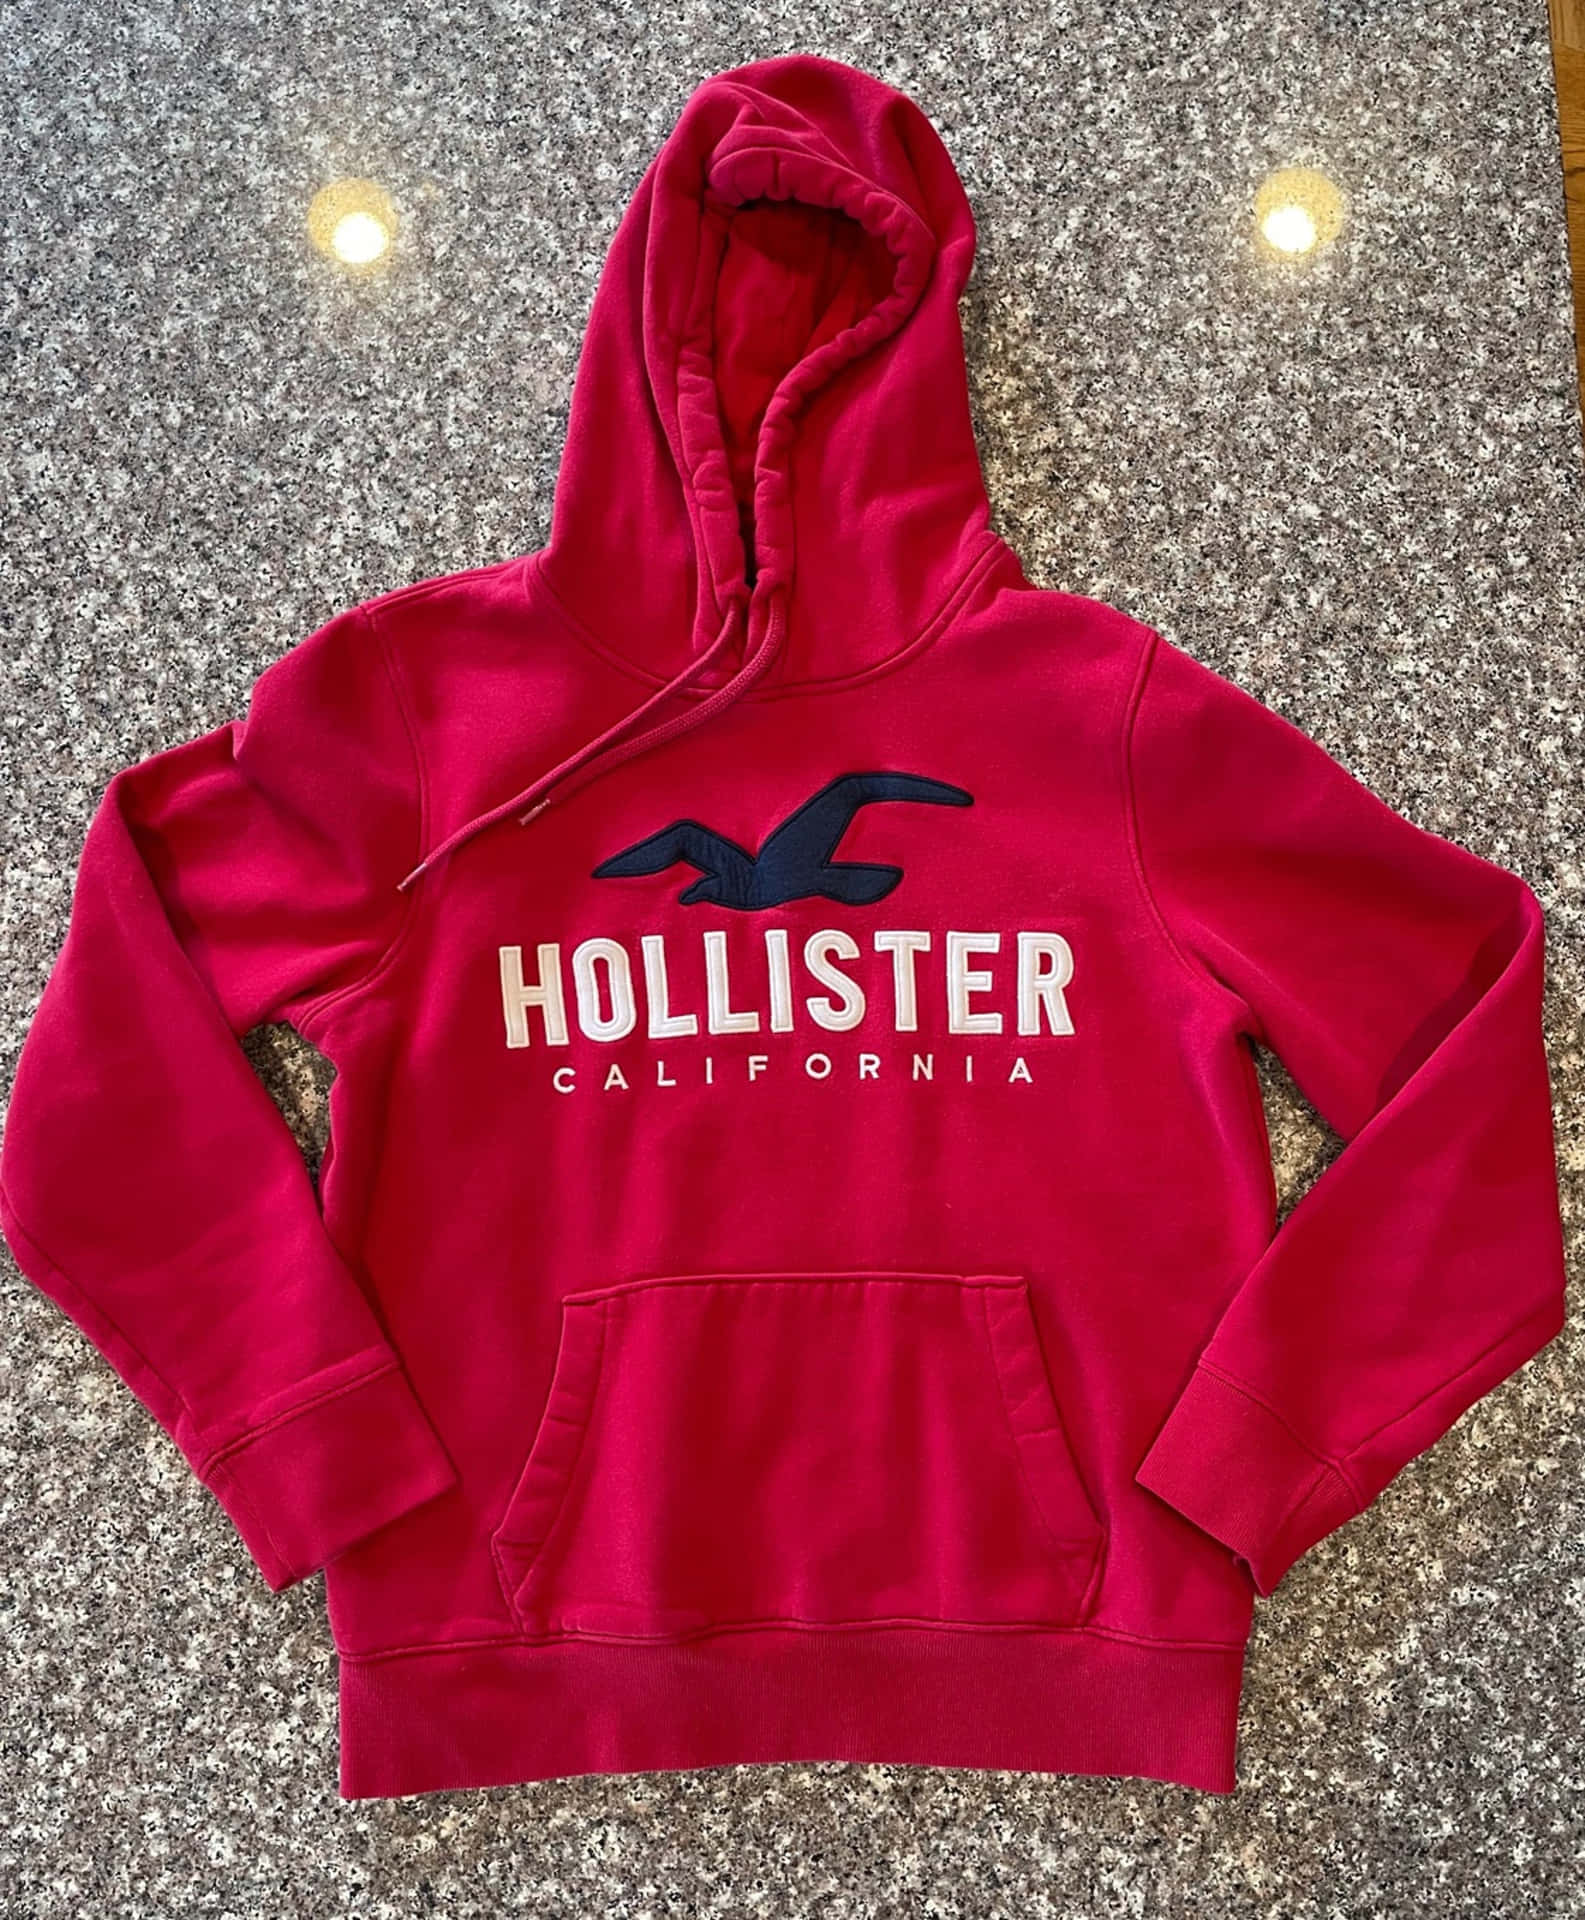 Download Visit The Beach With Hollister